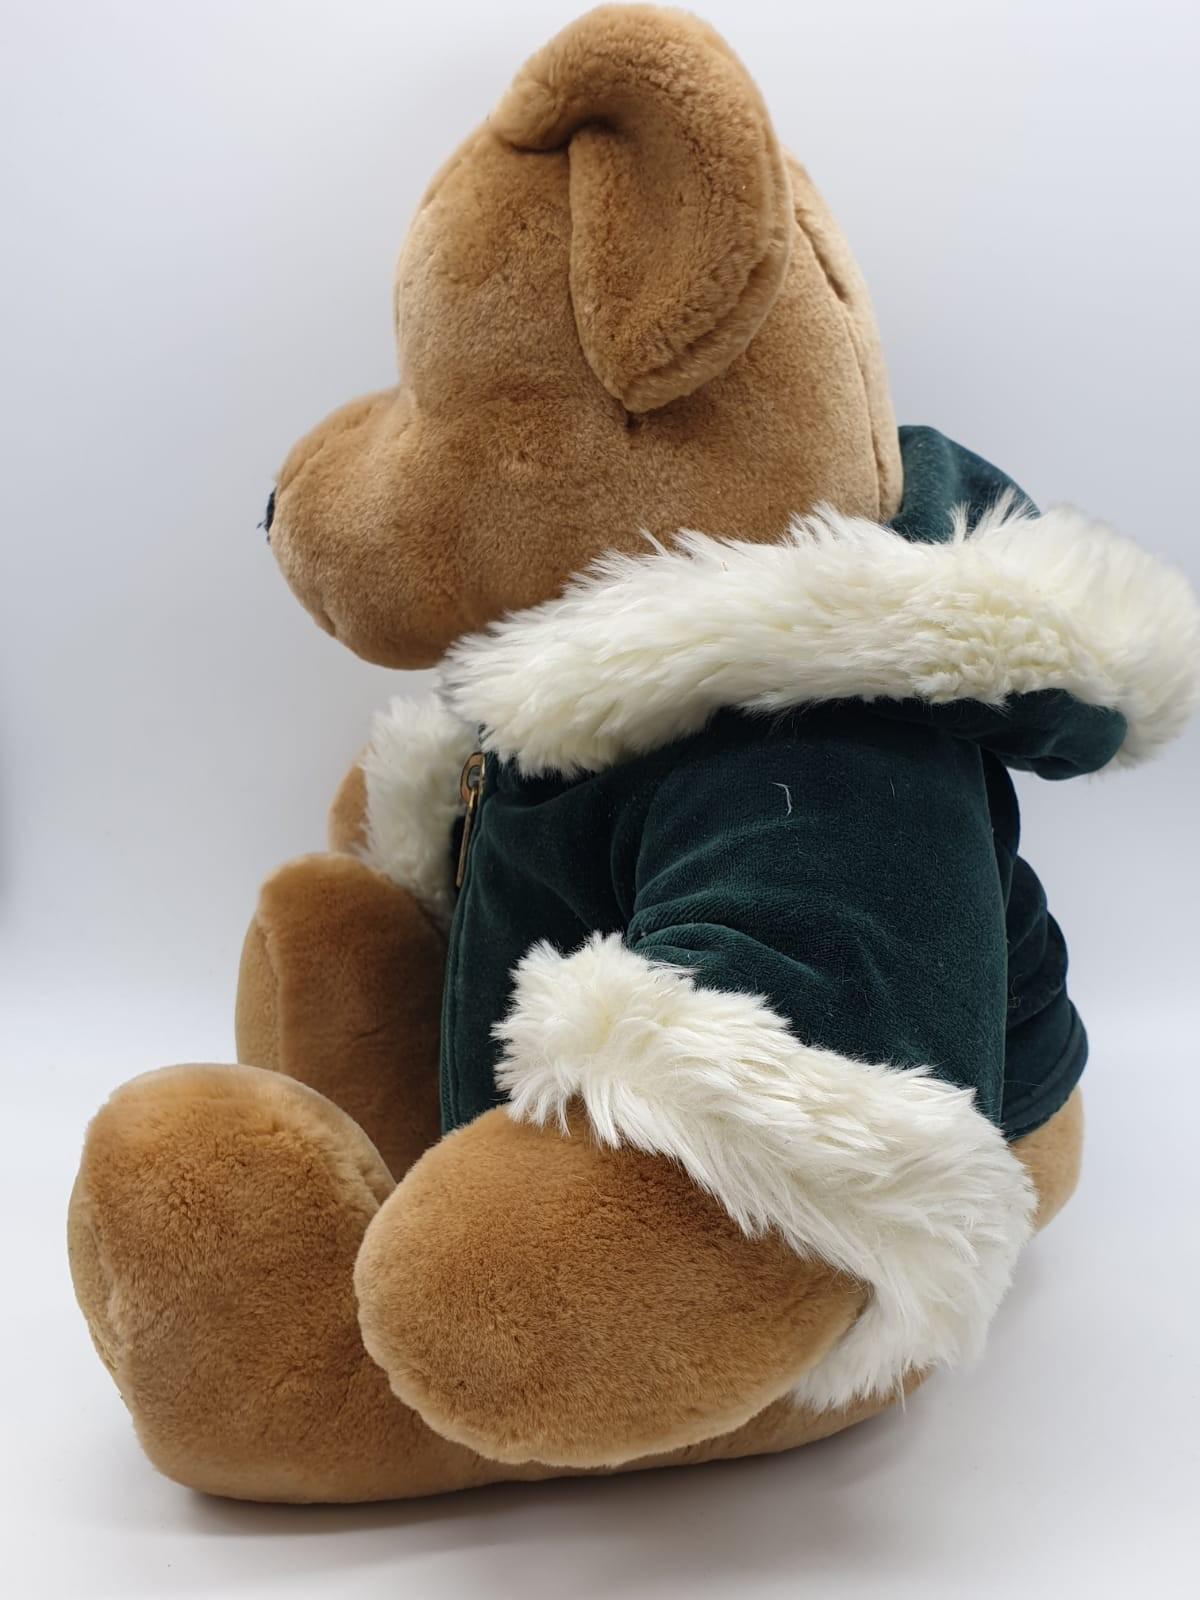 2 Harrods Teddy Bears 2001&2008 approx 40cms, very collectible - Image 6 of 21